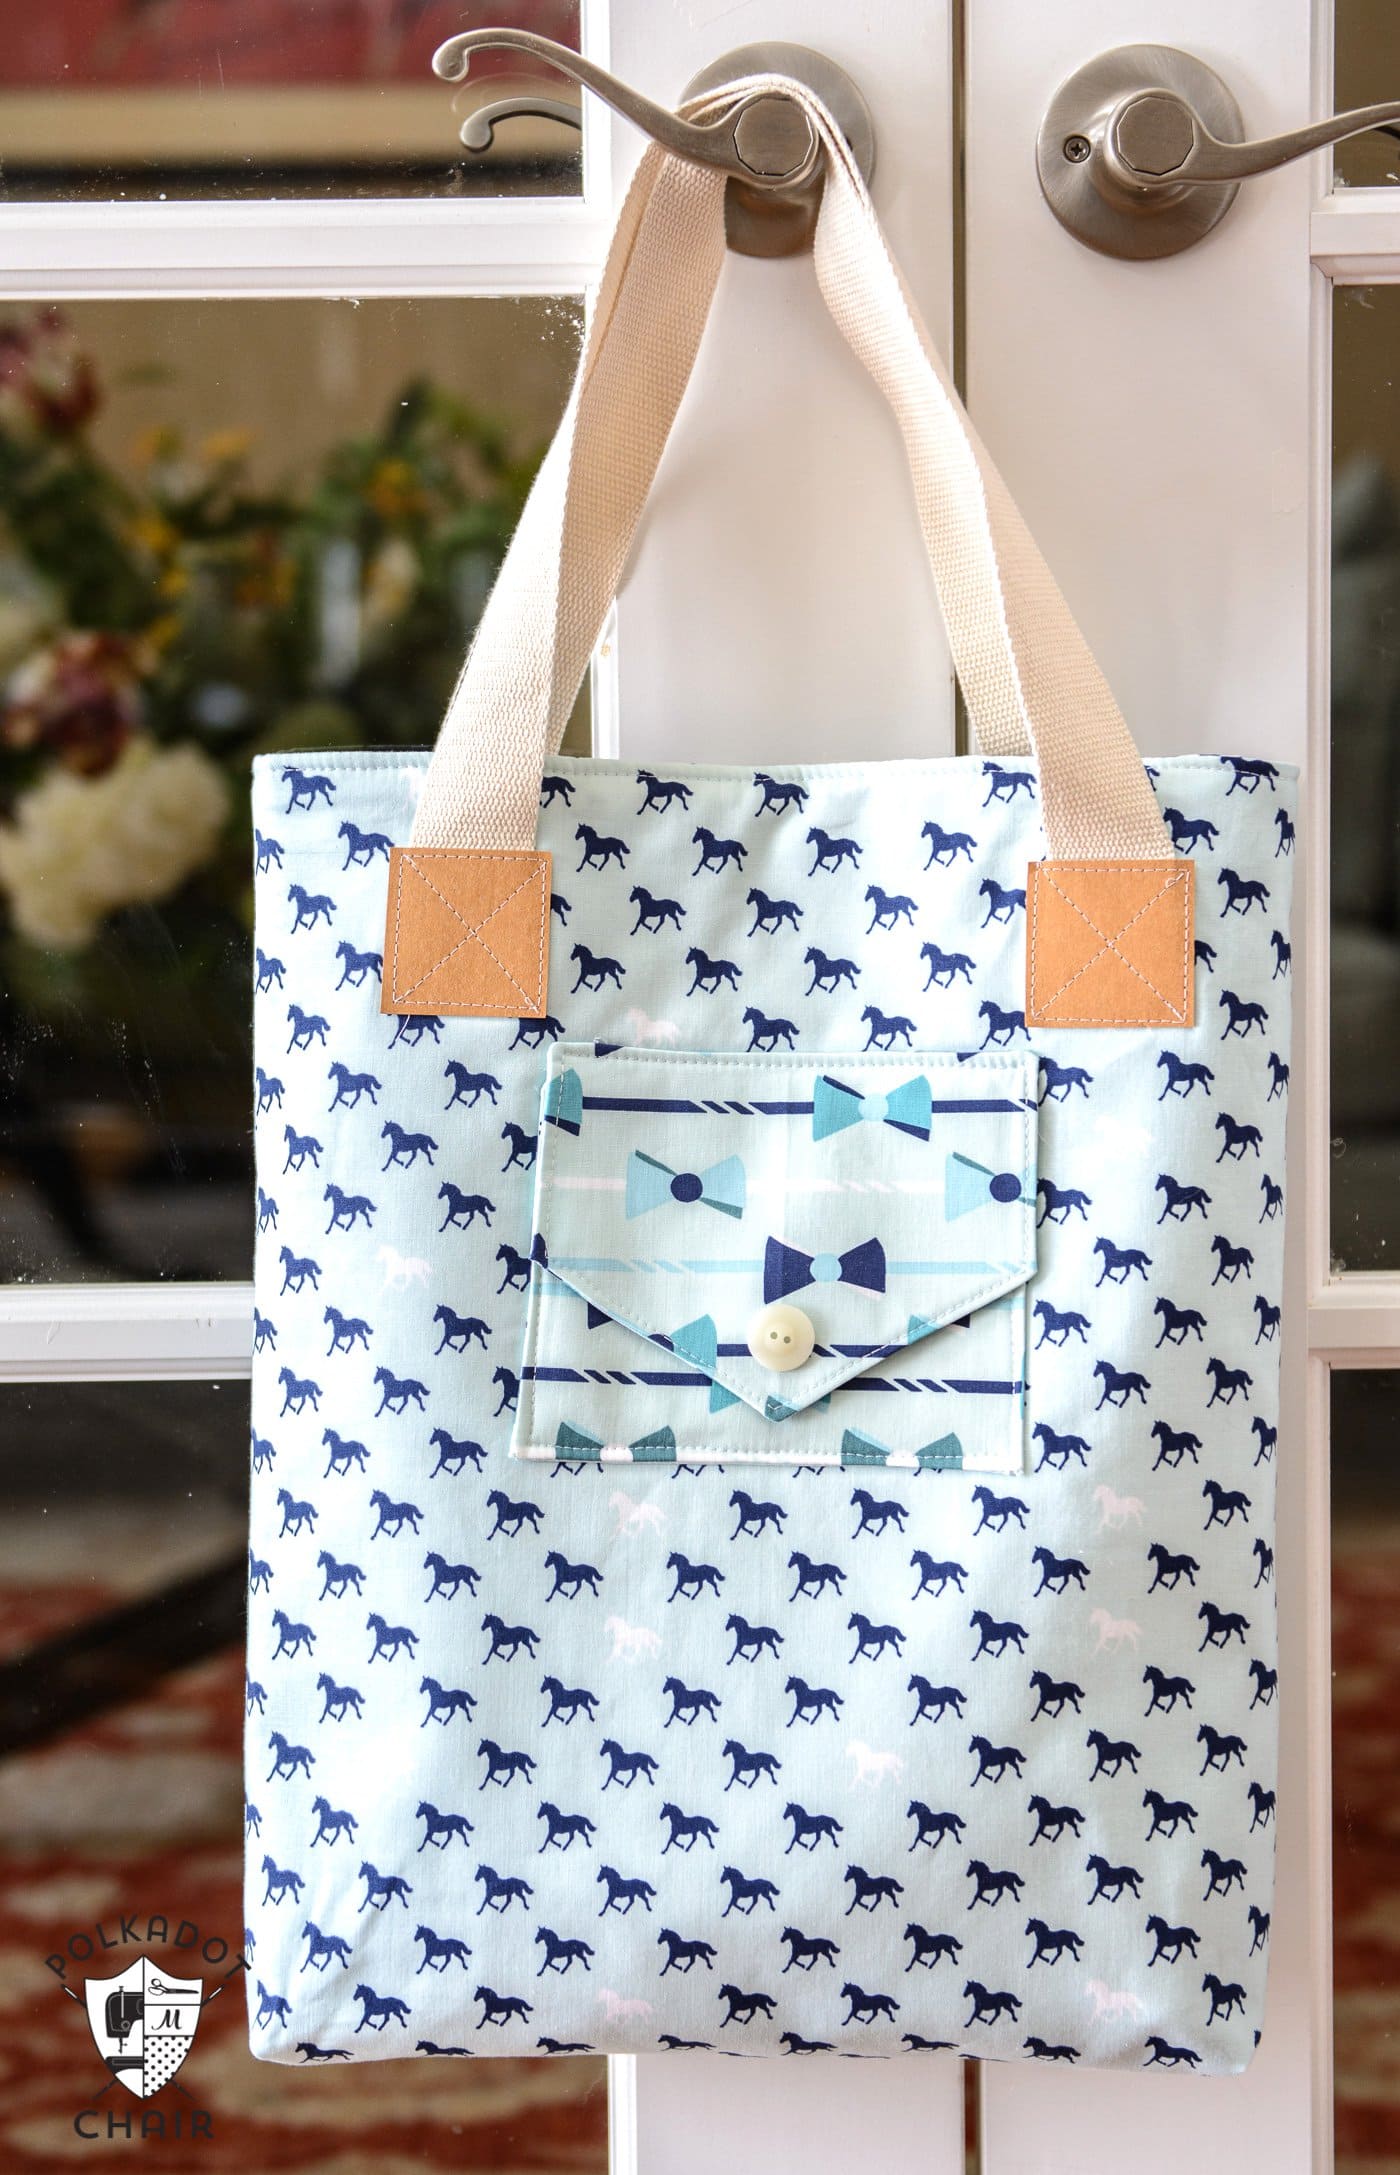 A New Tote Bag Sewing Pattern - The Polka Dot Chair